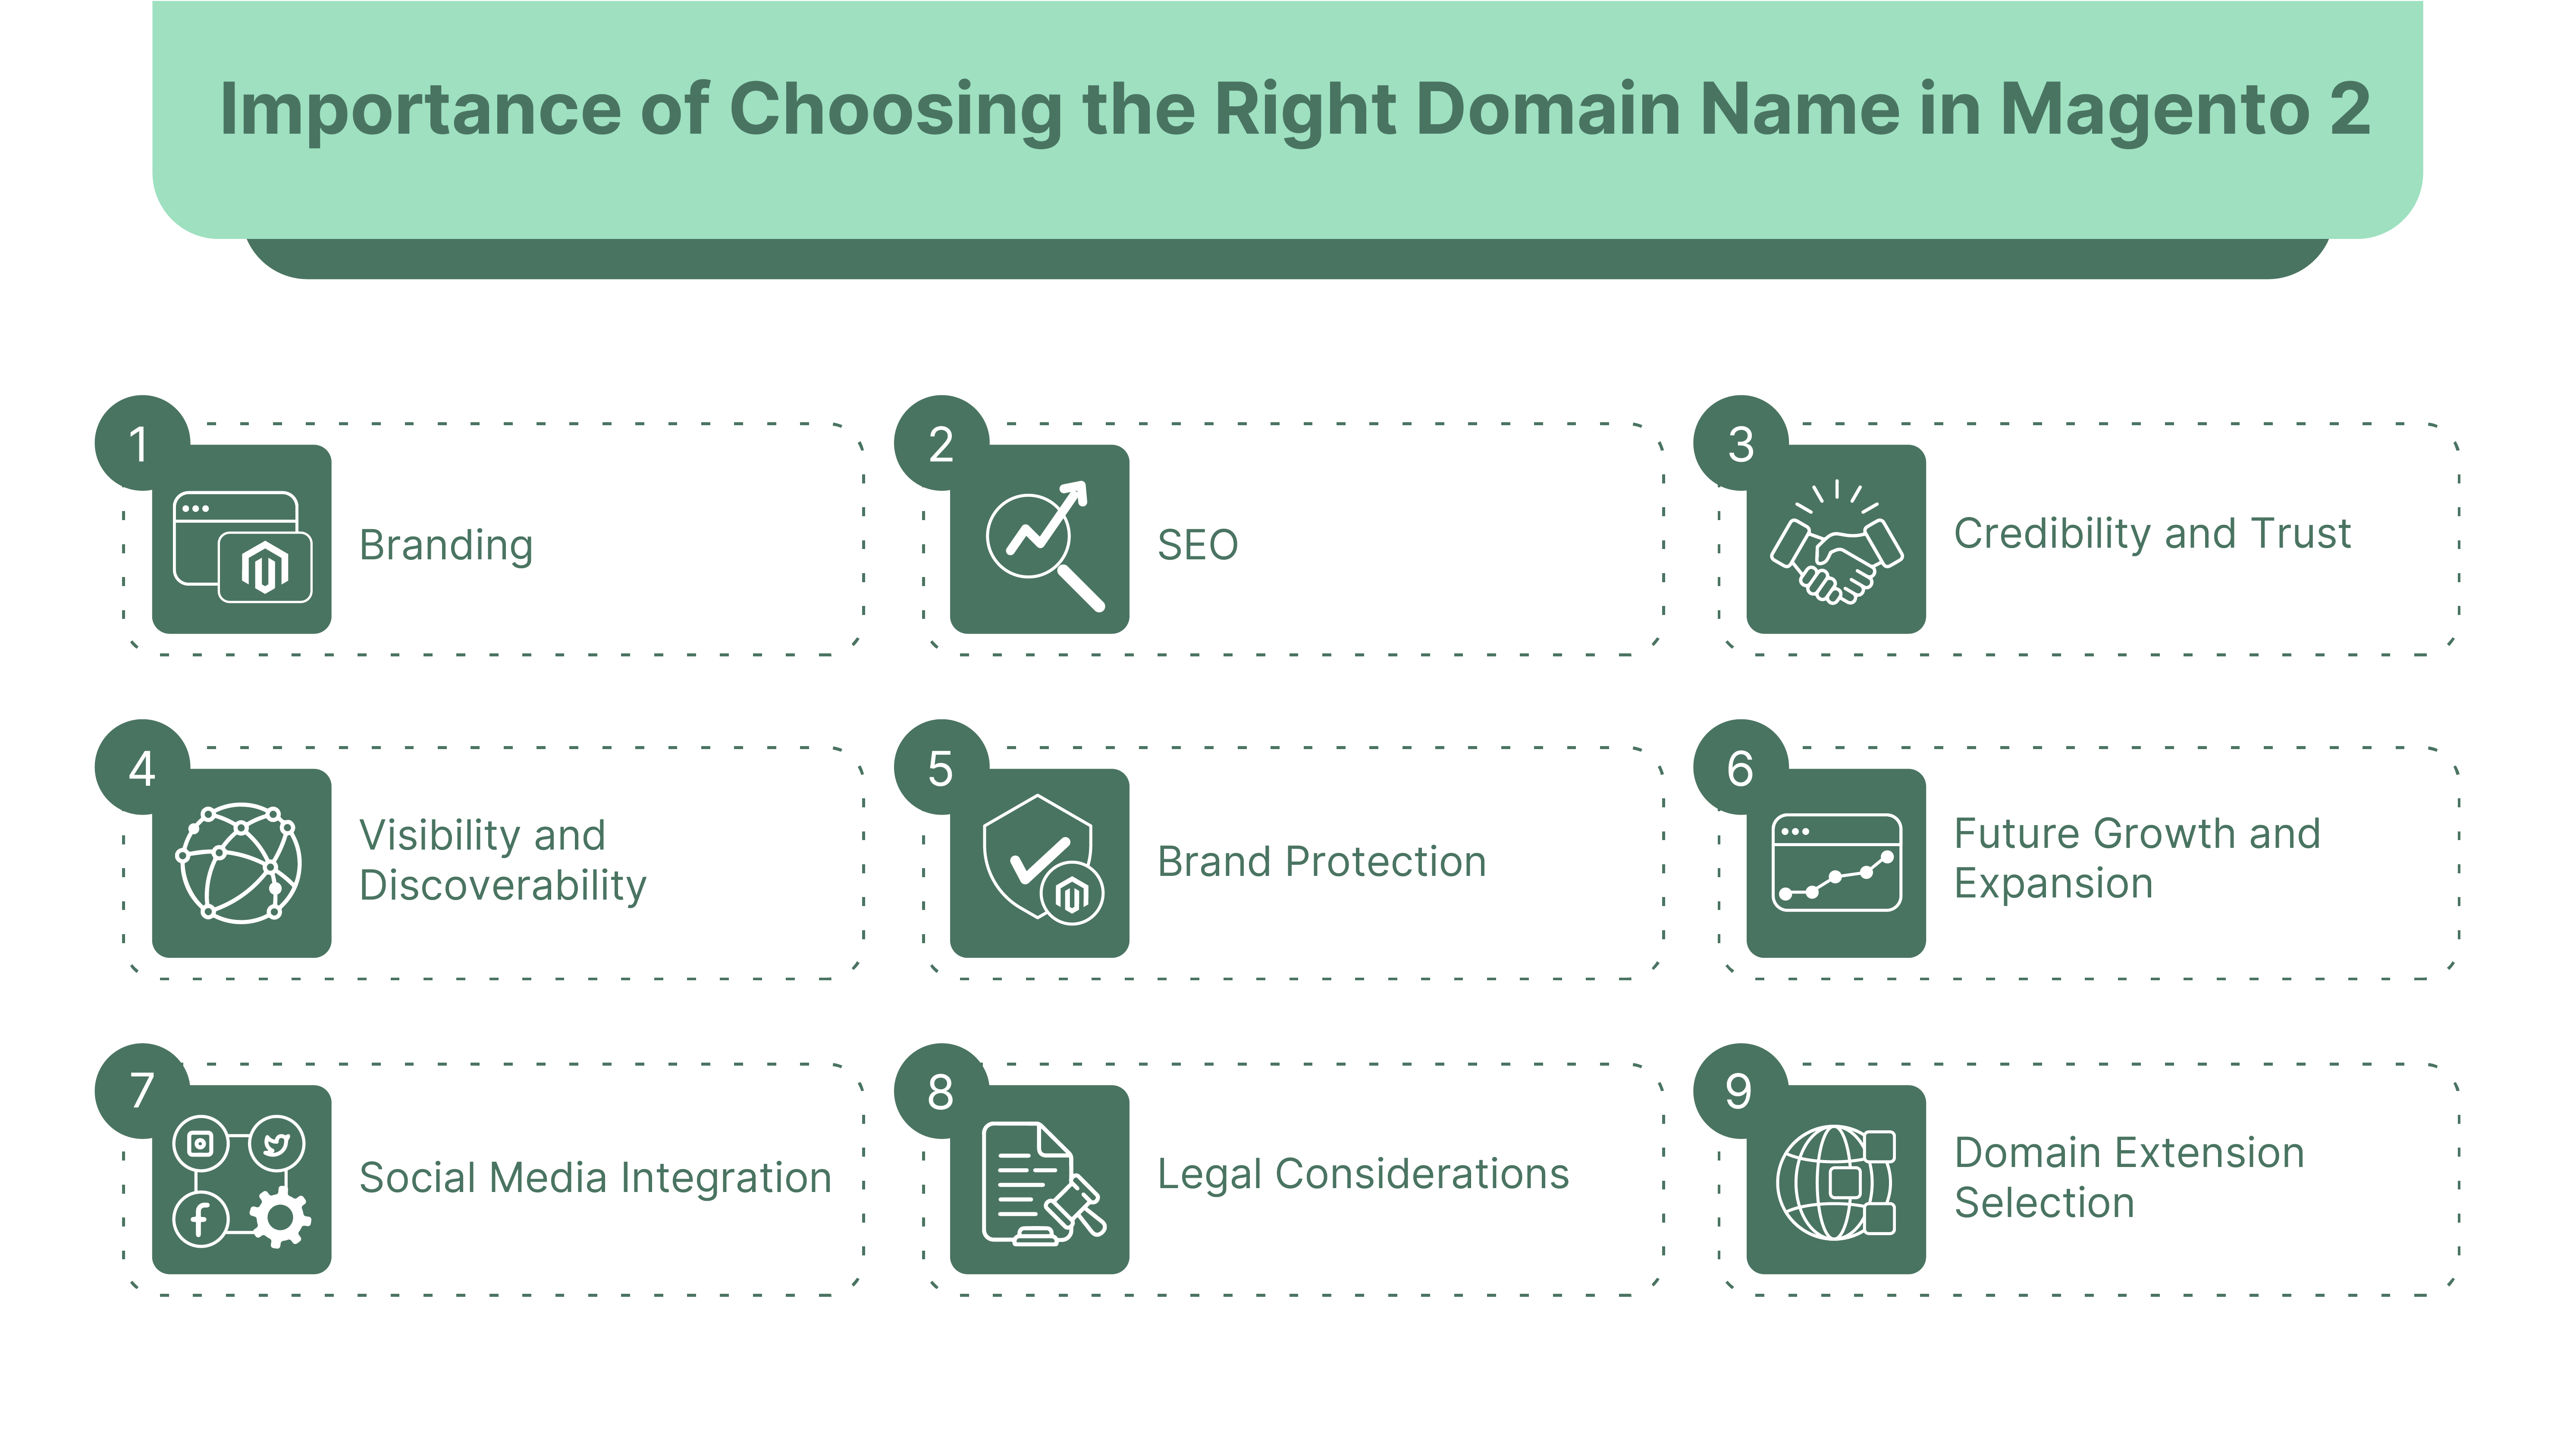 Importance of Choosing the Right Domain Name in Magento 2